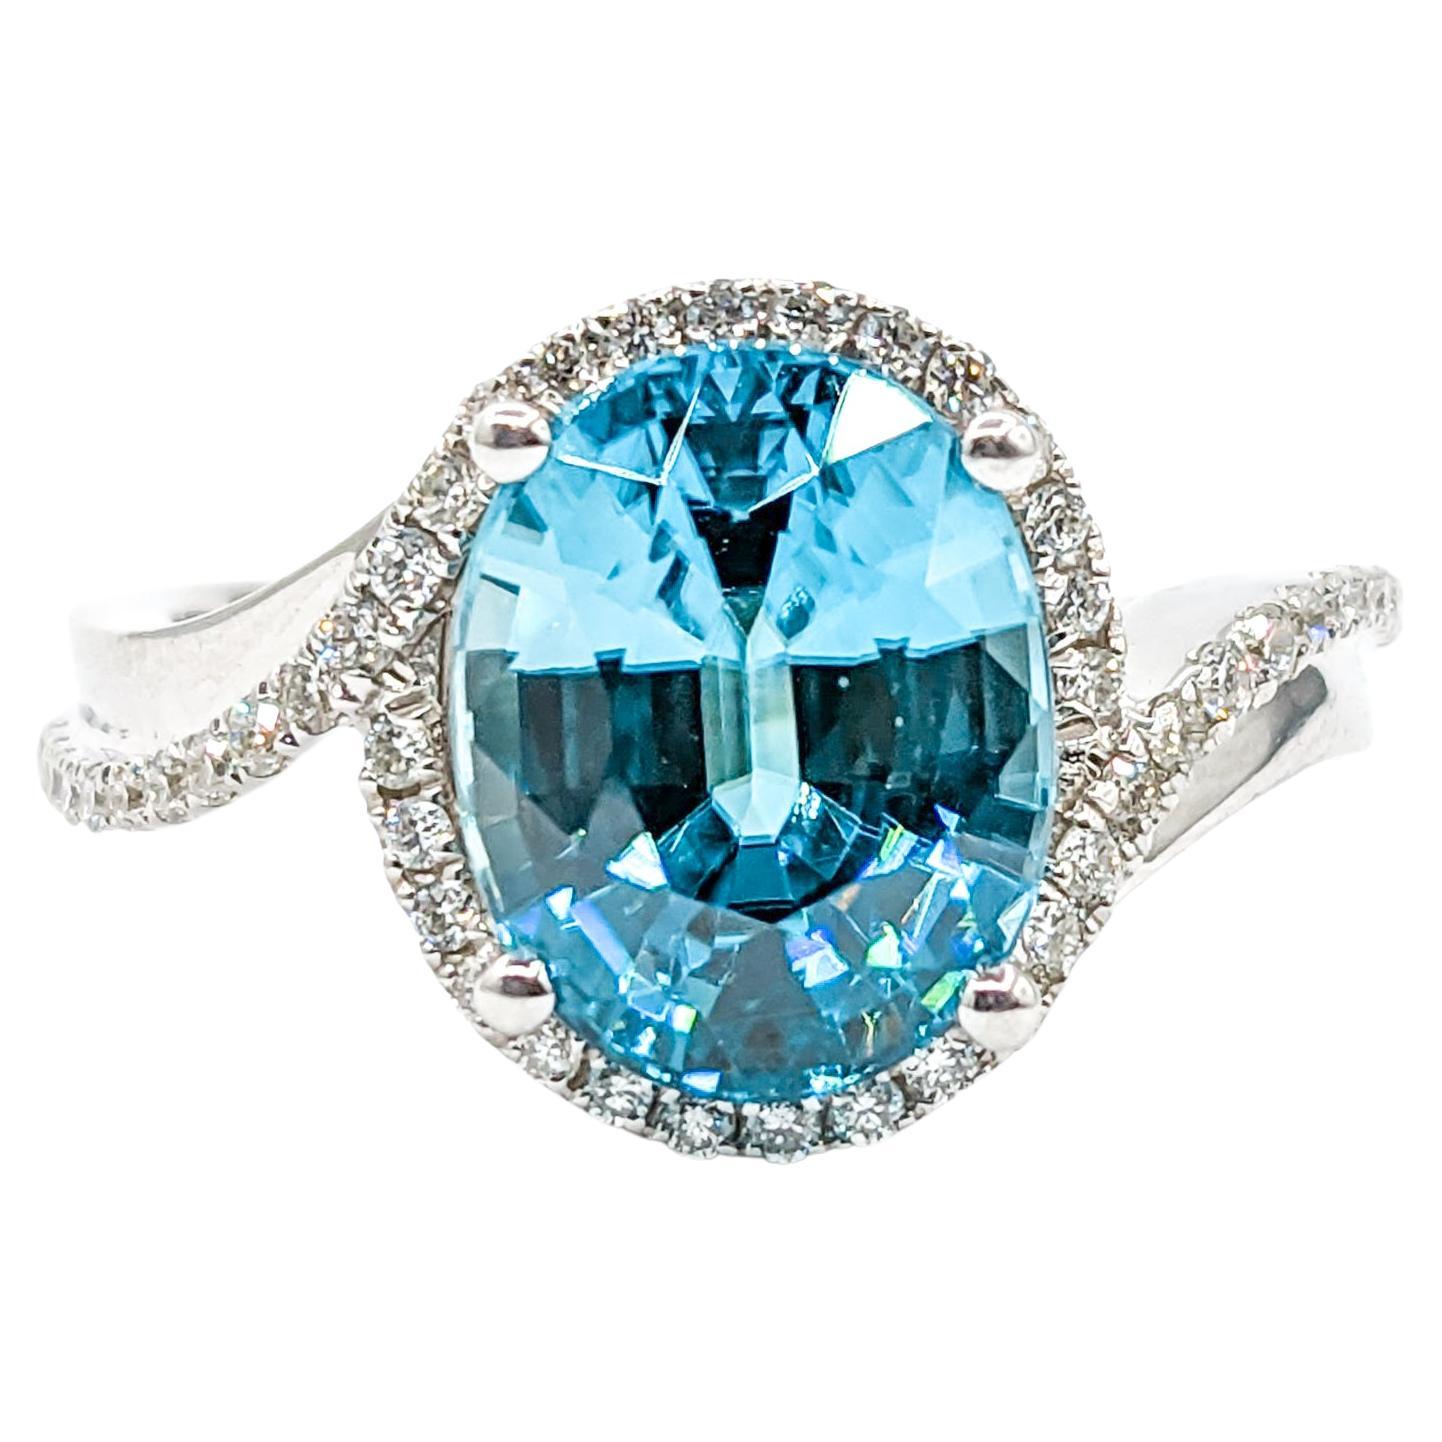 5.0ct Blue Zircon & Diamond Ring In White Gold For Sale